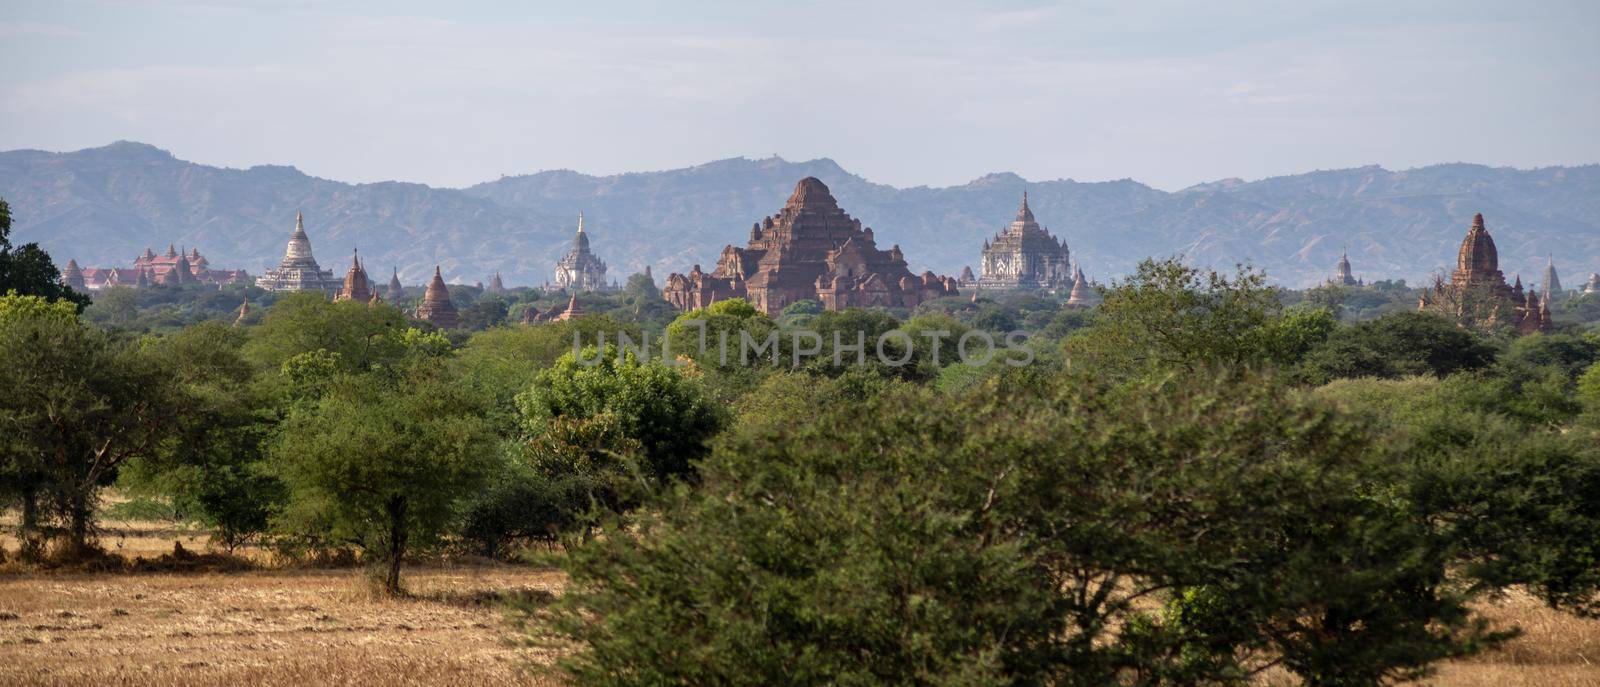 Old and historical temples peaking up above the trees in the distance by arvidnorberg